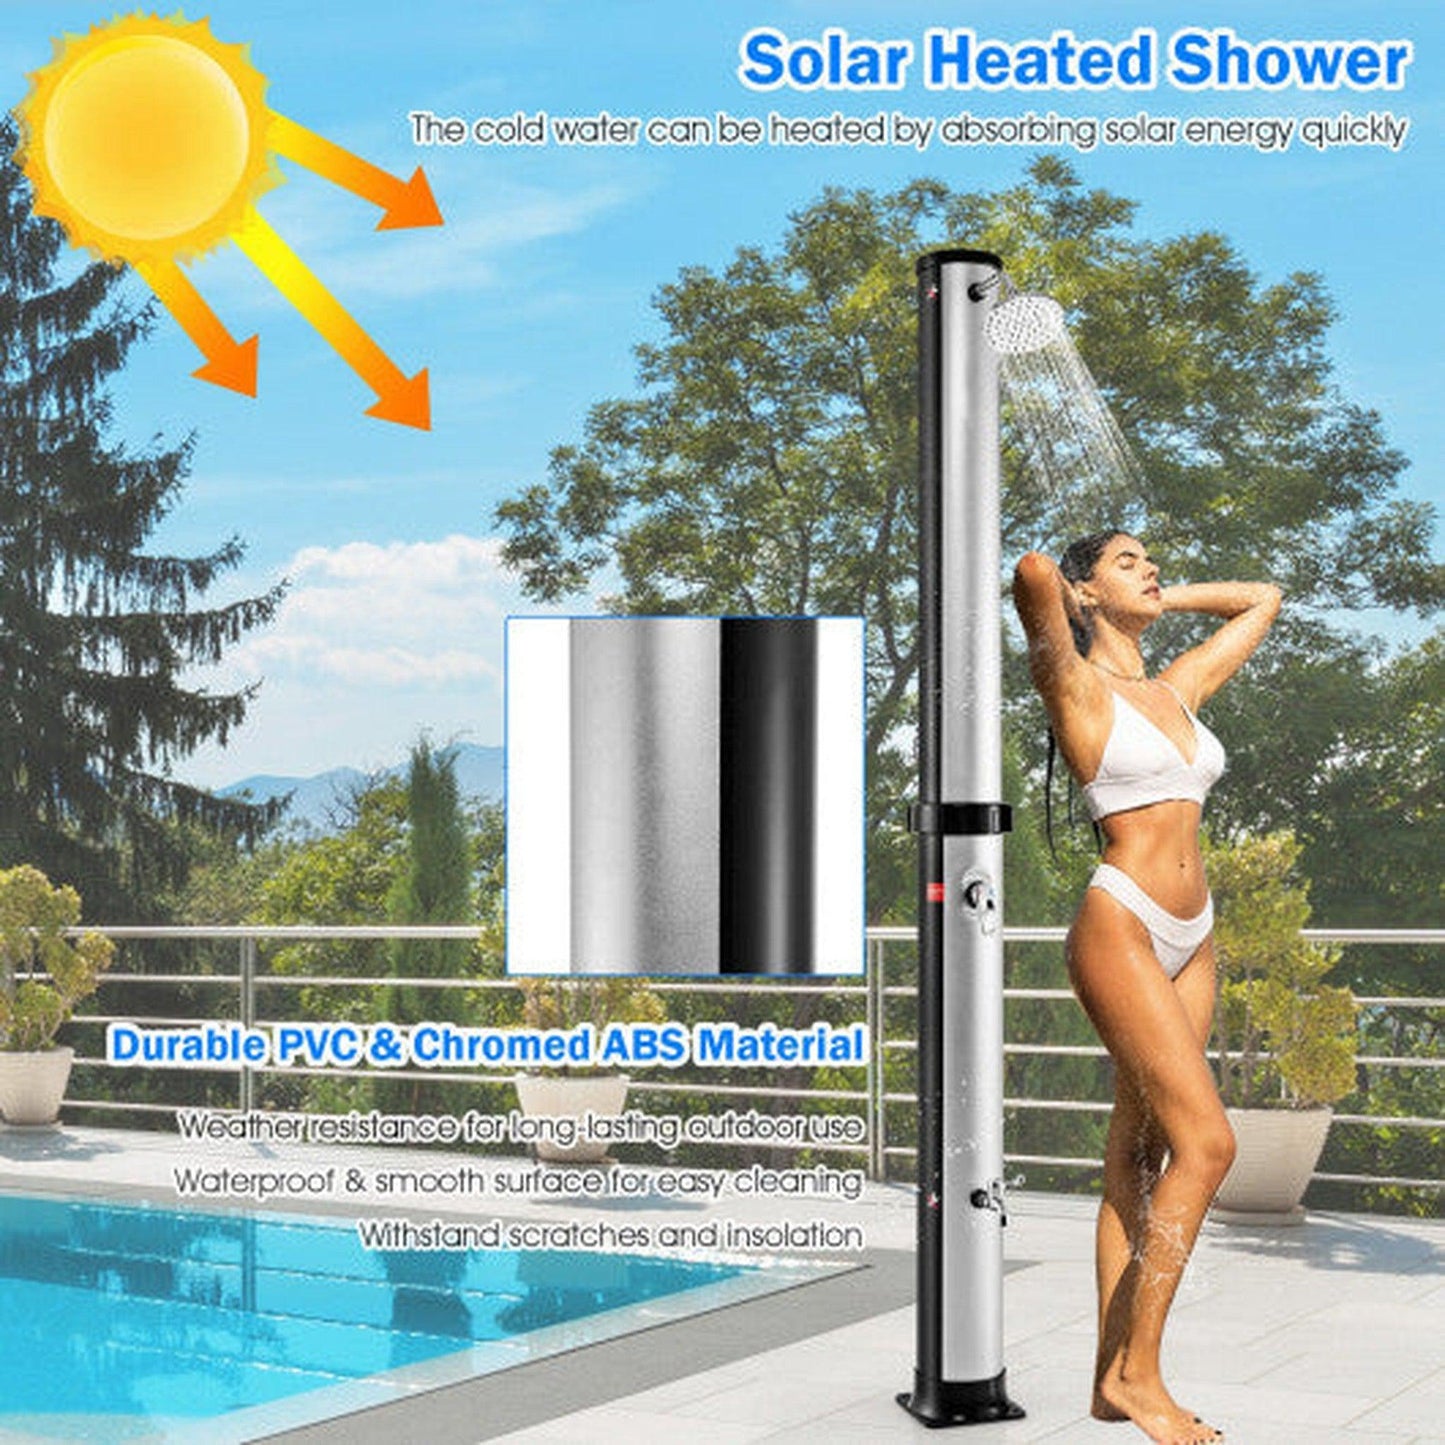 Costway 7.2' NP10571 Solar-Heated Outdoor Shower with Free-Rotating Shower Head